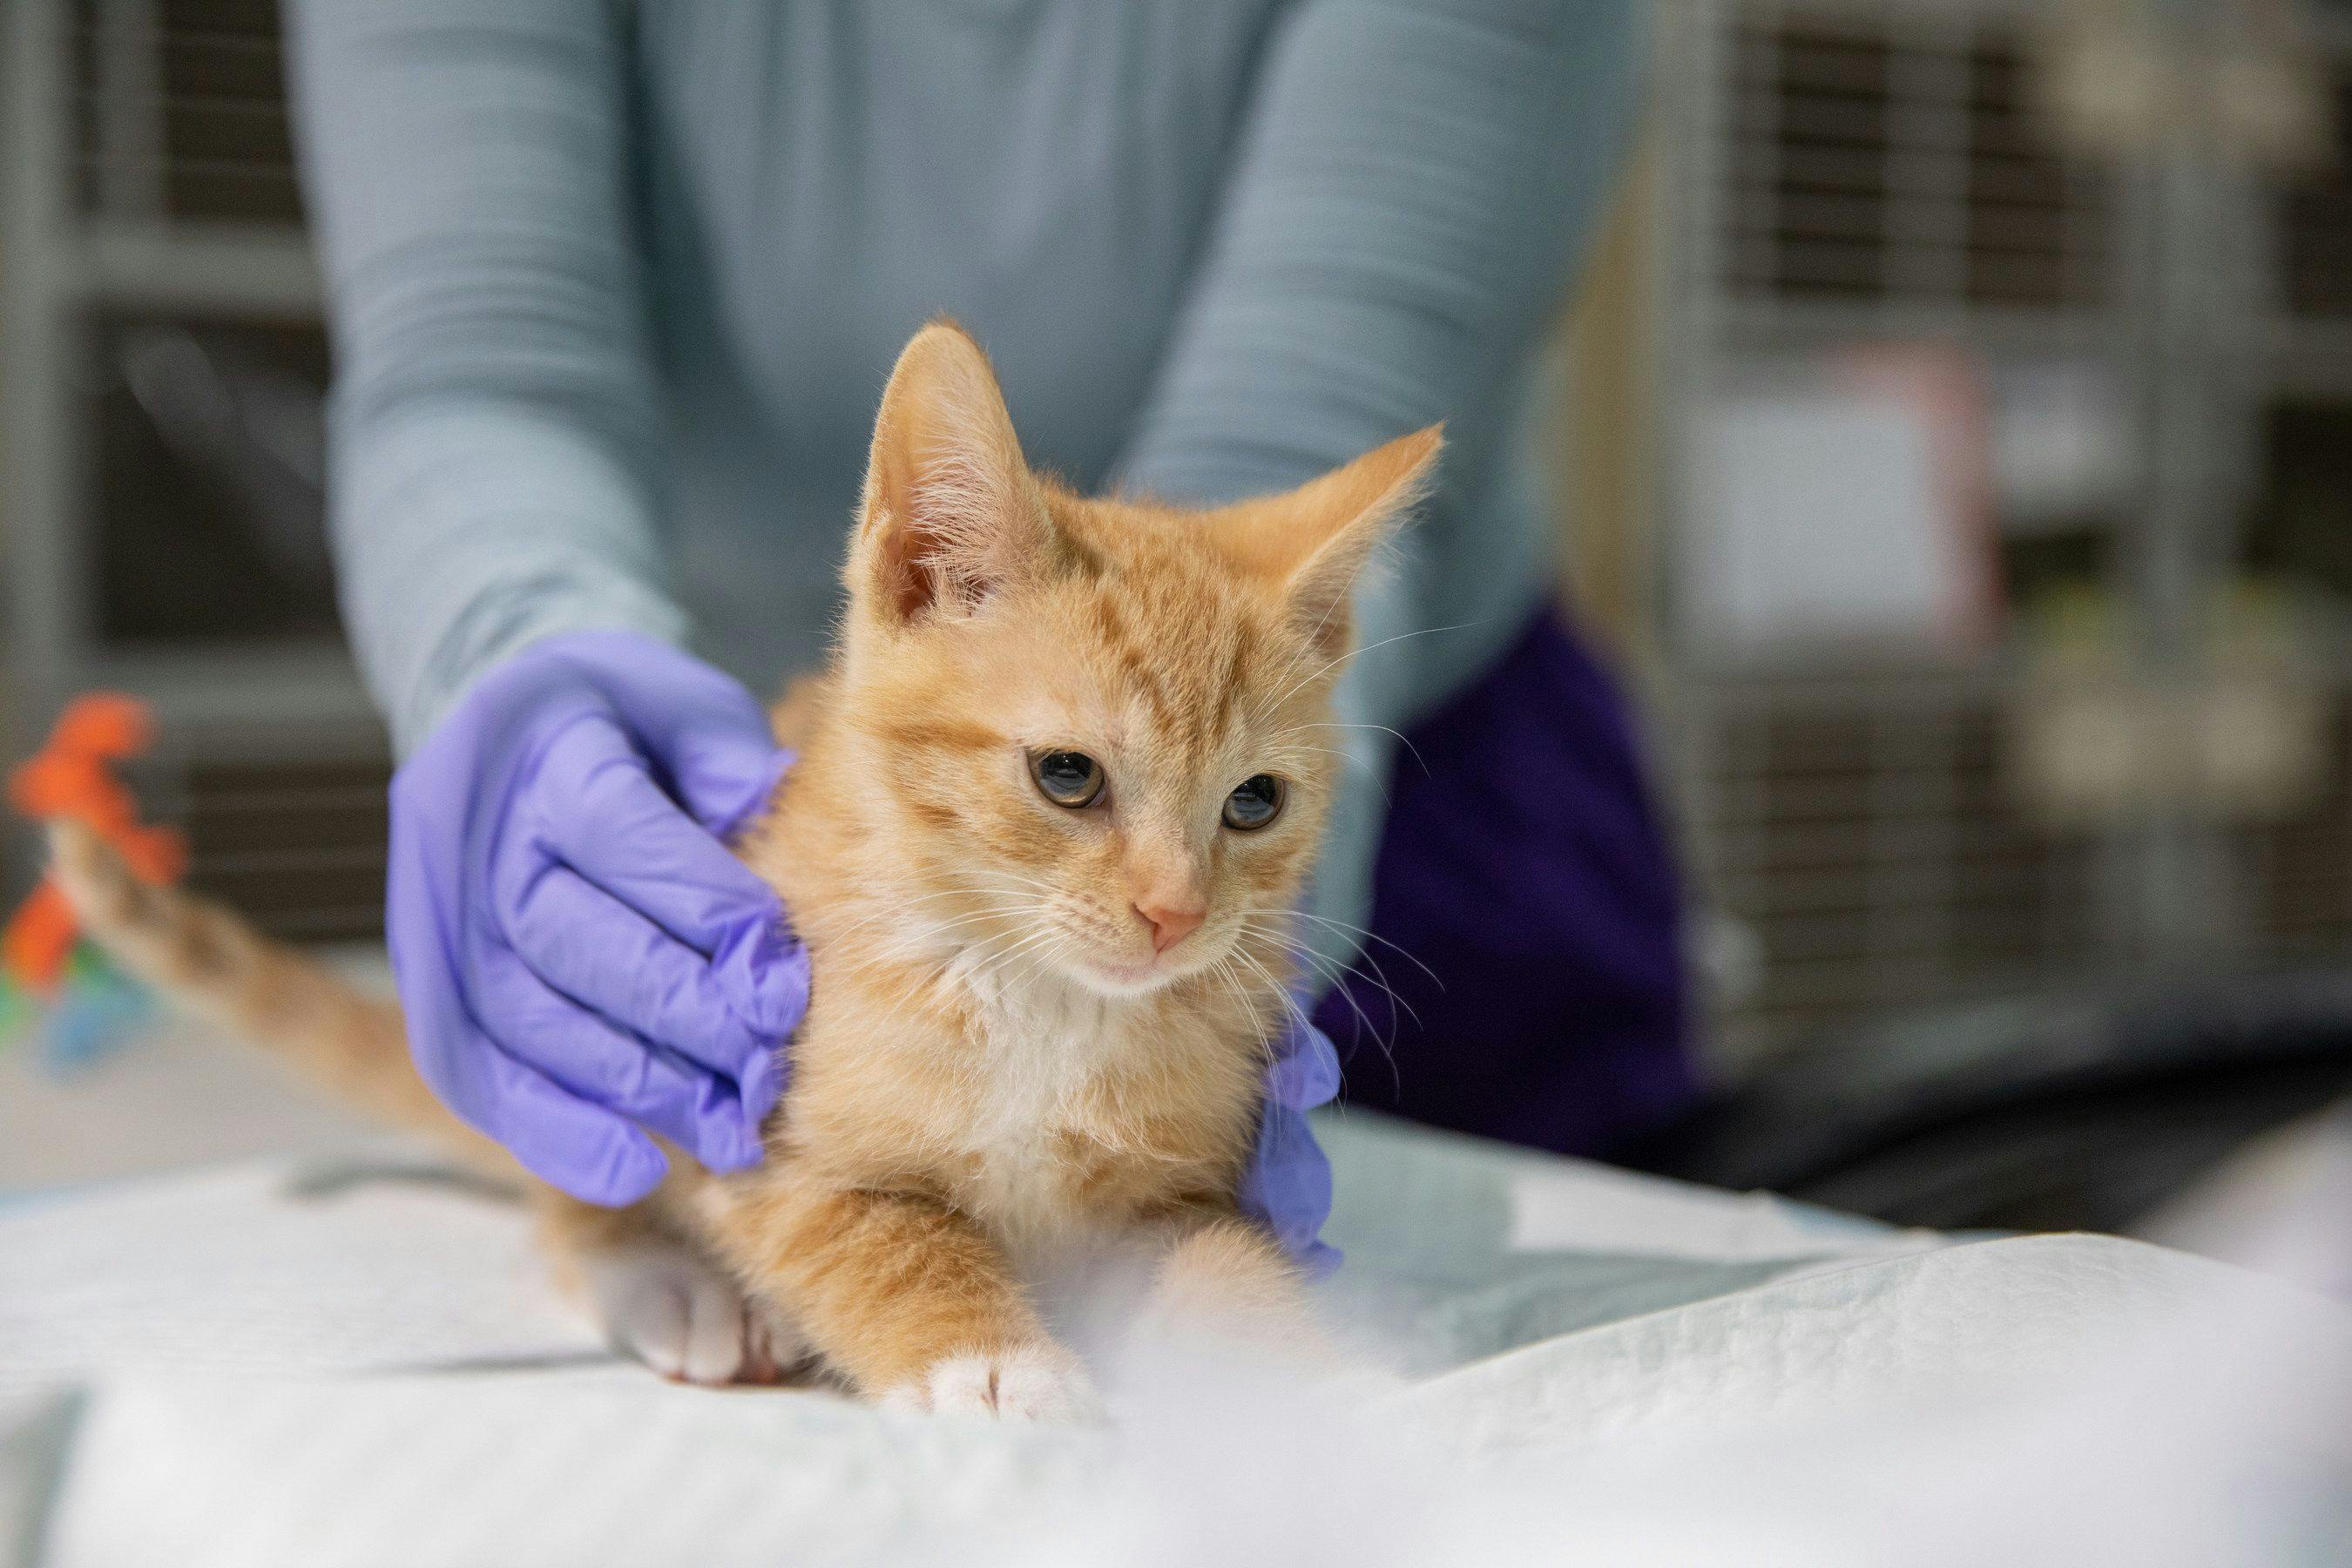 Zanzibar arrived at the ASPCA Kitten Nursery at 4 weeks of age in need of treatment for an upper respiratory infection. Now that she has recovered and matured, she will soon be available for adoption. (Image courtesy of ASPCA)